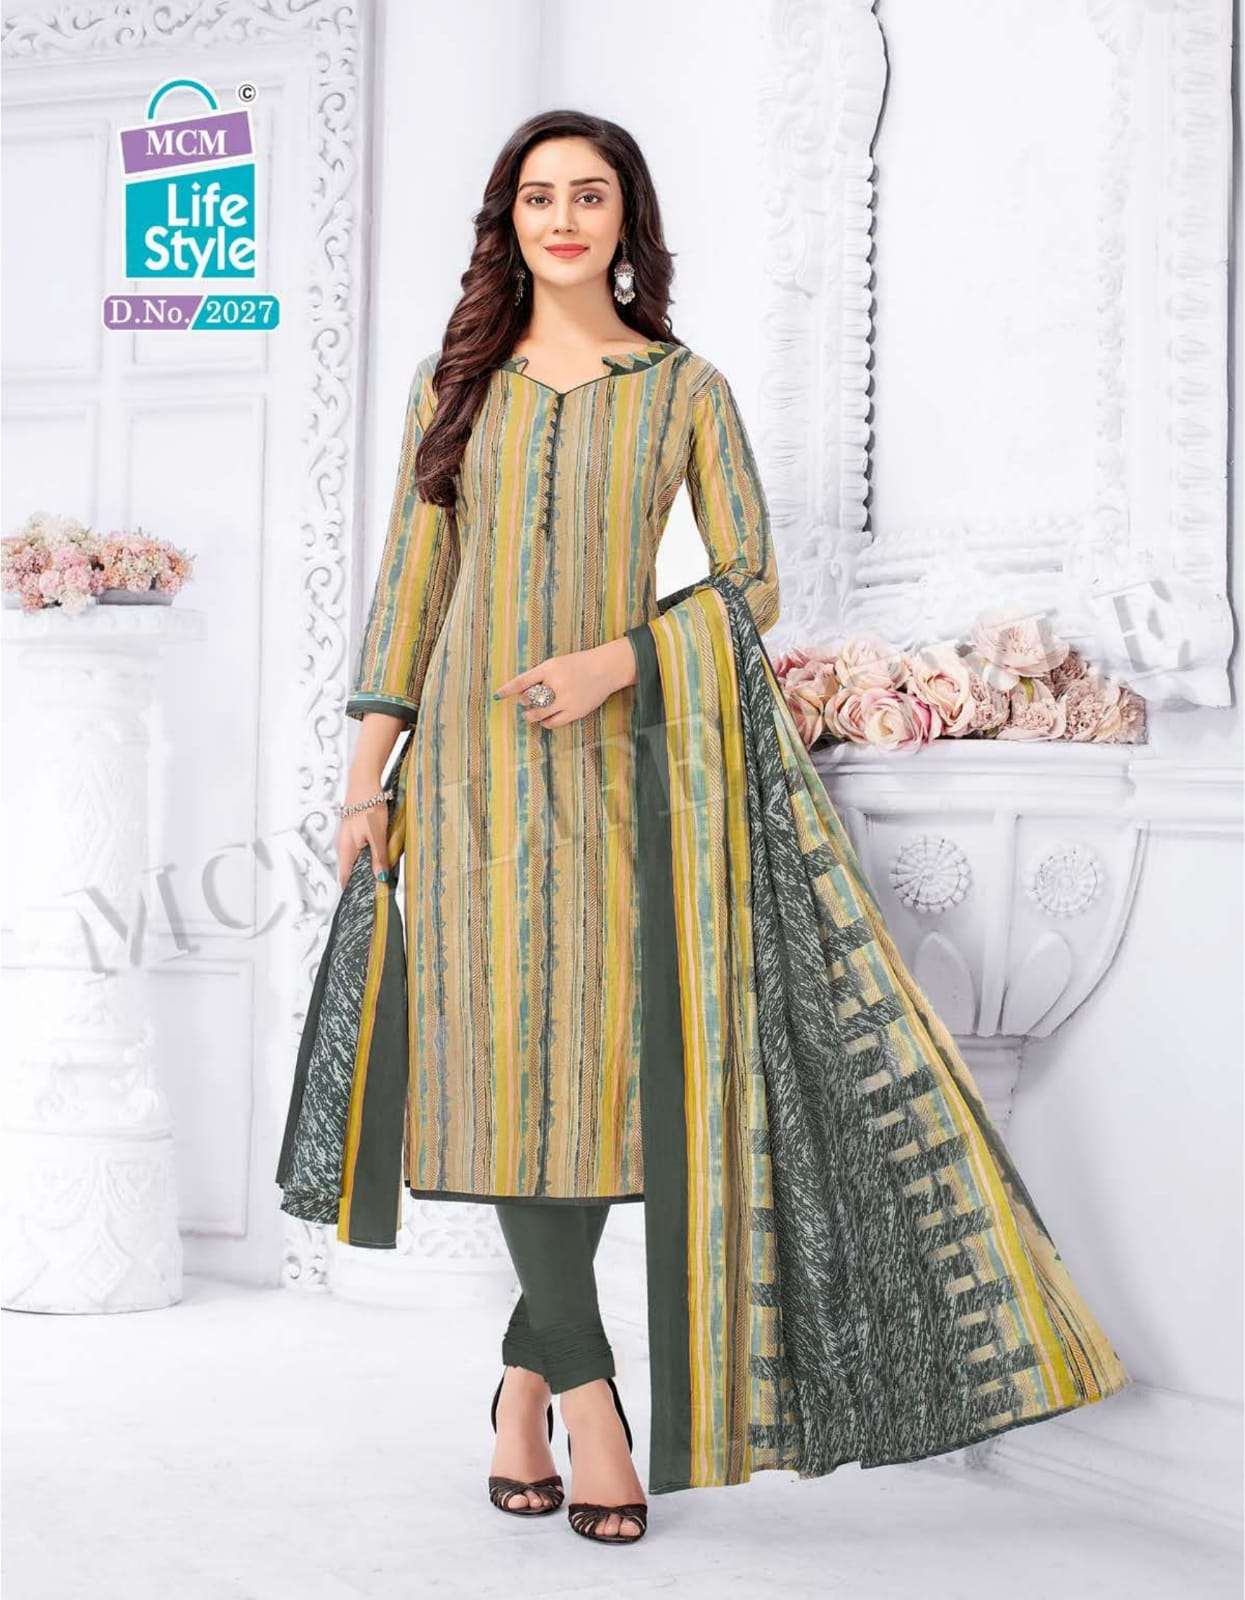 CLASSIC LAWN BY MCM LIFESTYLE 2025 TO 2034 SERIES BEAUTIFUL SUITS COLORFUL STYLISH FANCY CASUAL WEAR & ETHNIC WEAR COTTON PRINT DRESSES AT WHOLESALE PRICE